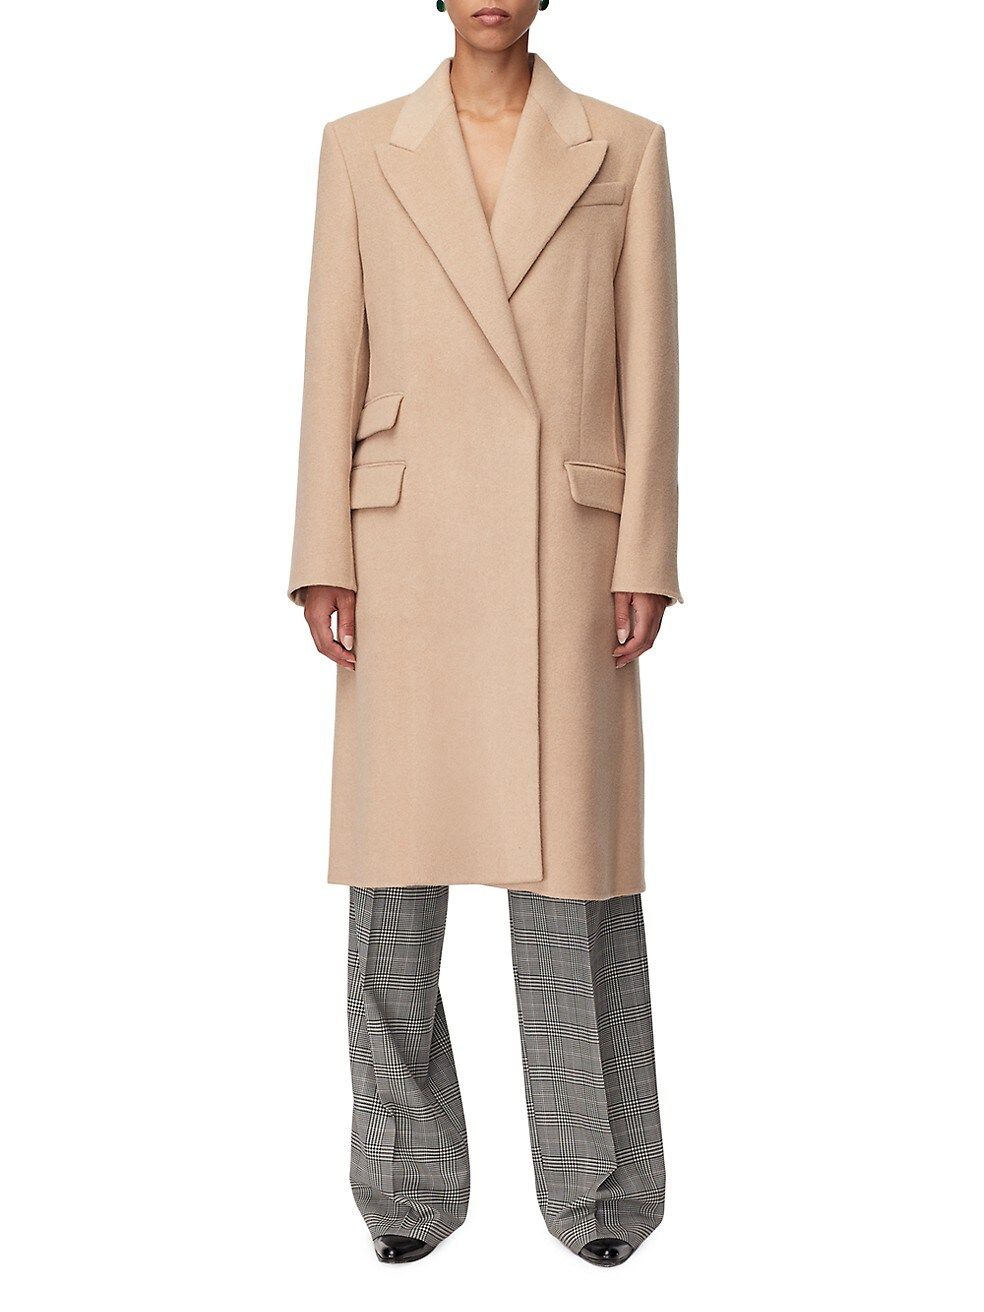 Another Tomorrow Double-Faced Wool Tailored Coat | Saks Fifth Avenue